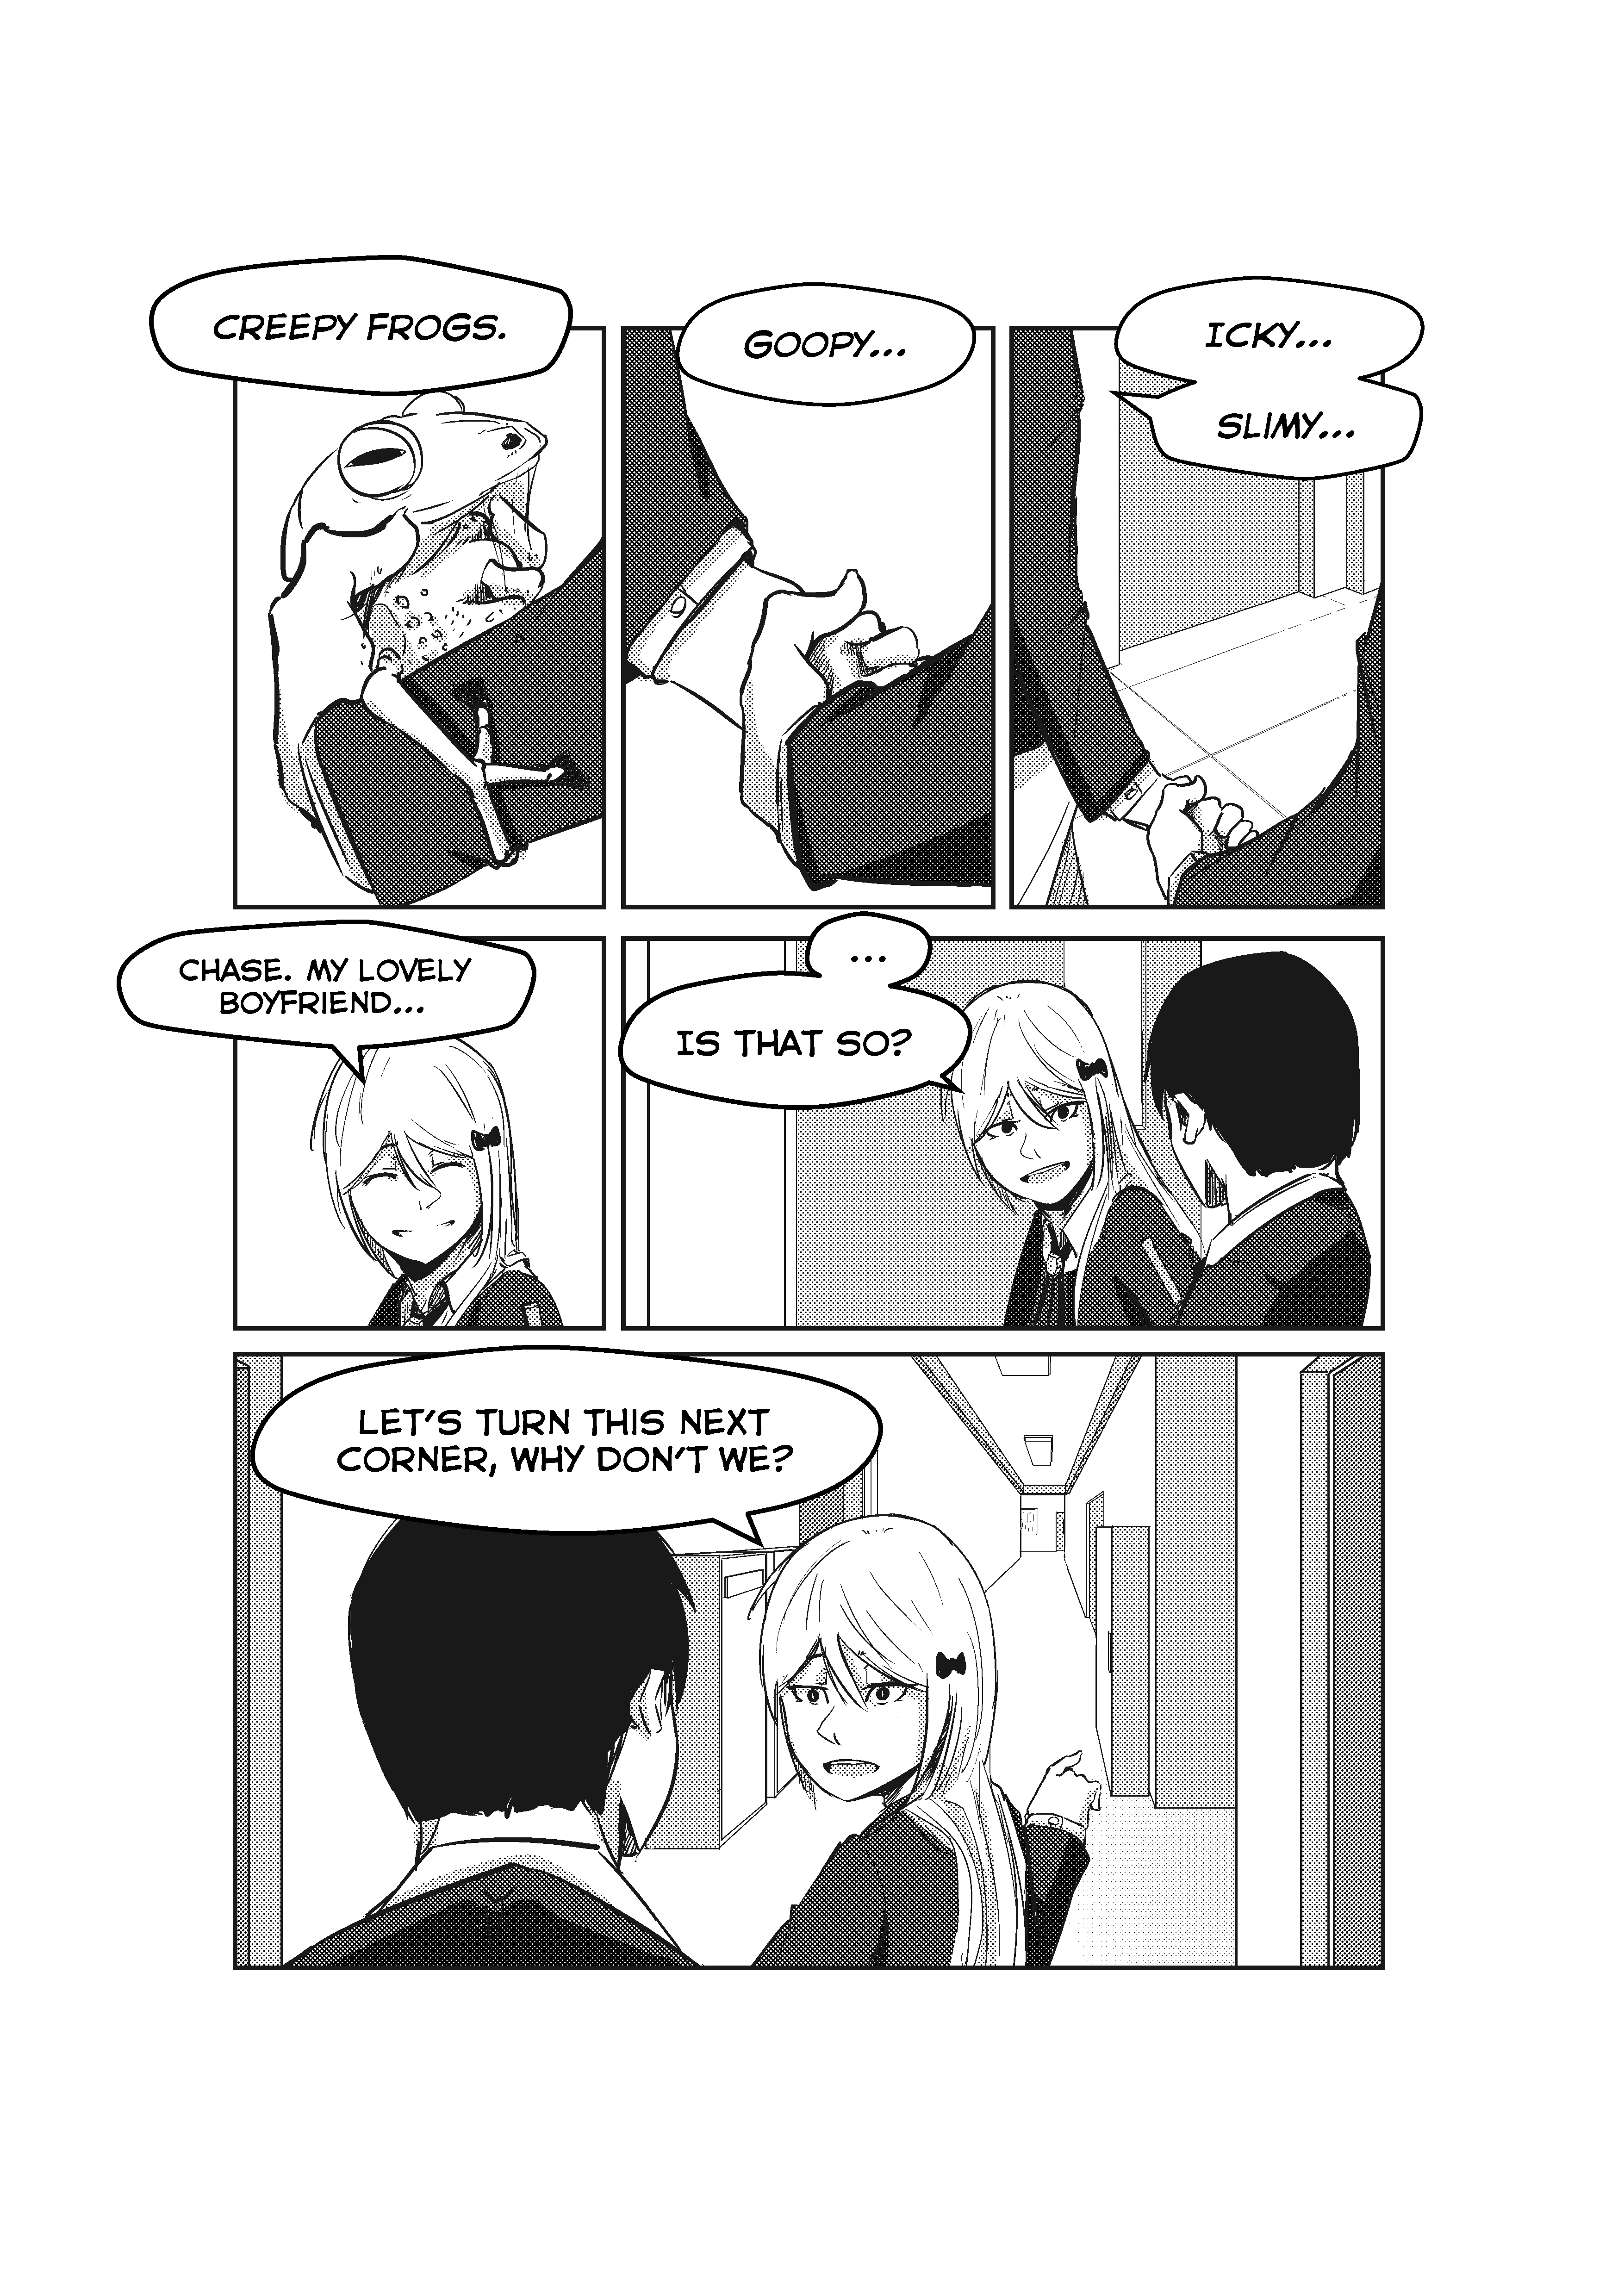 Opposites In Disguise - 8 page 21